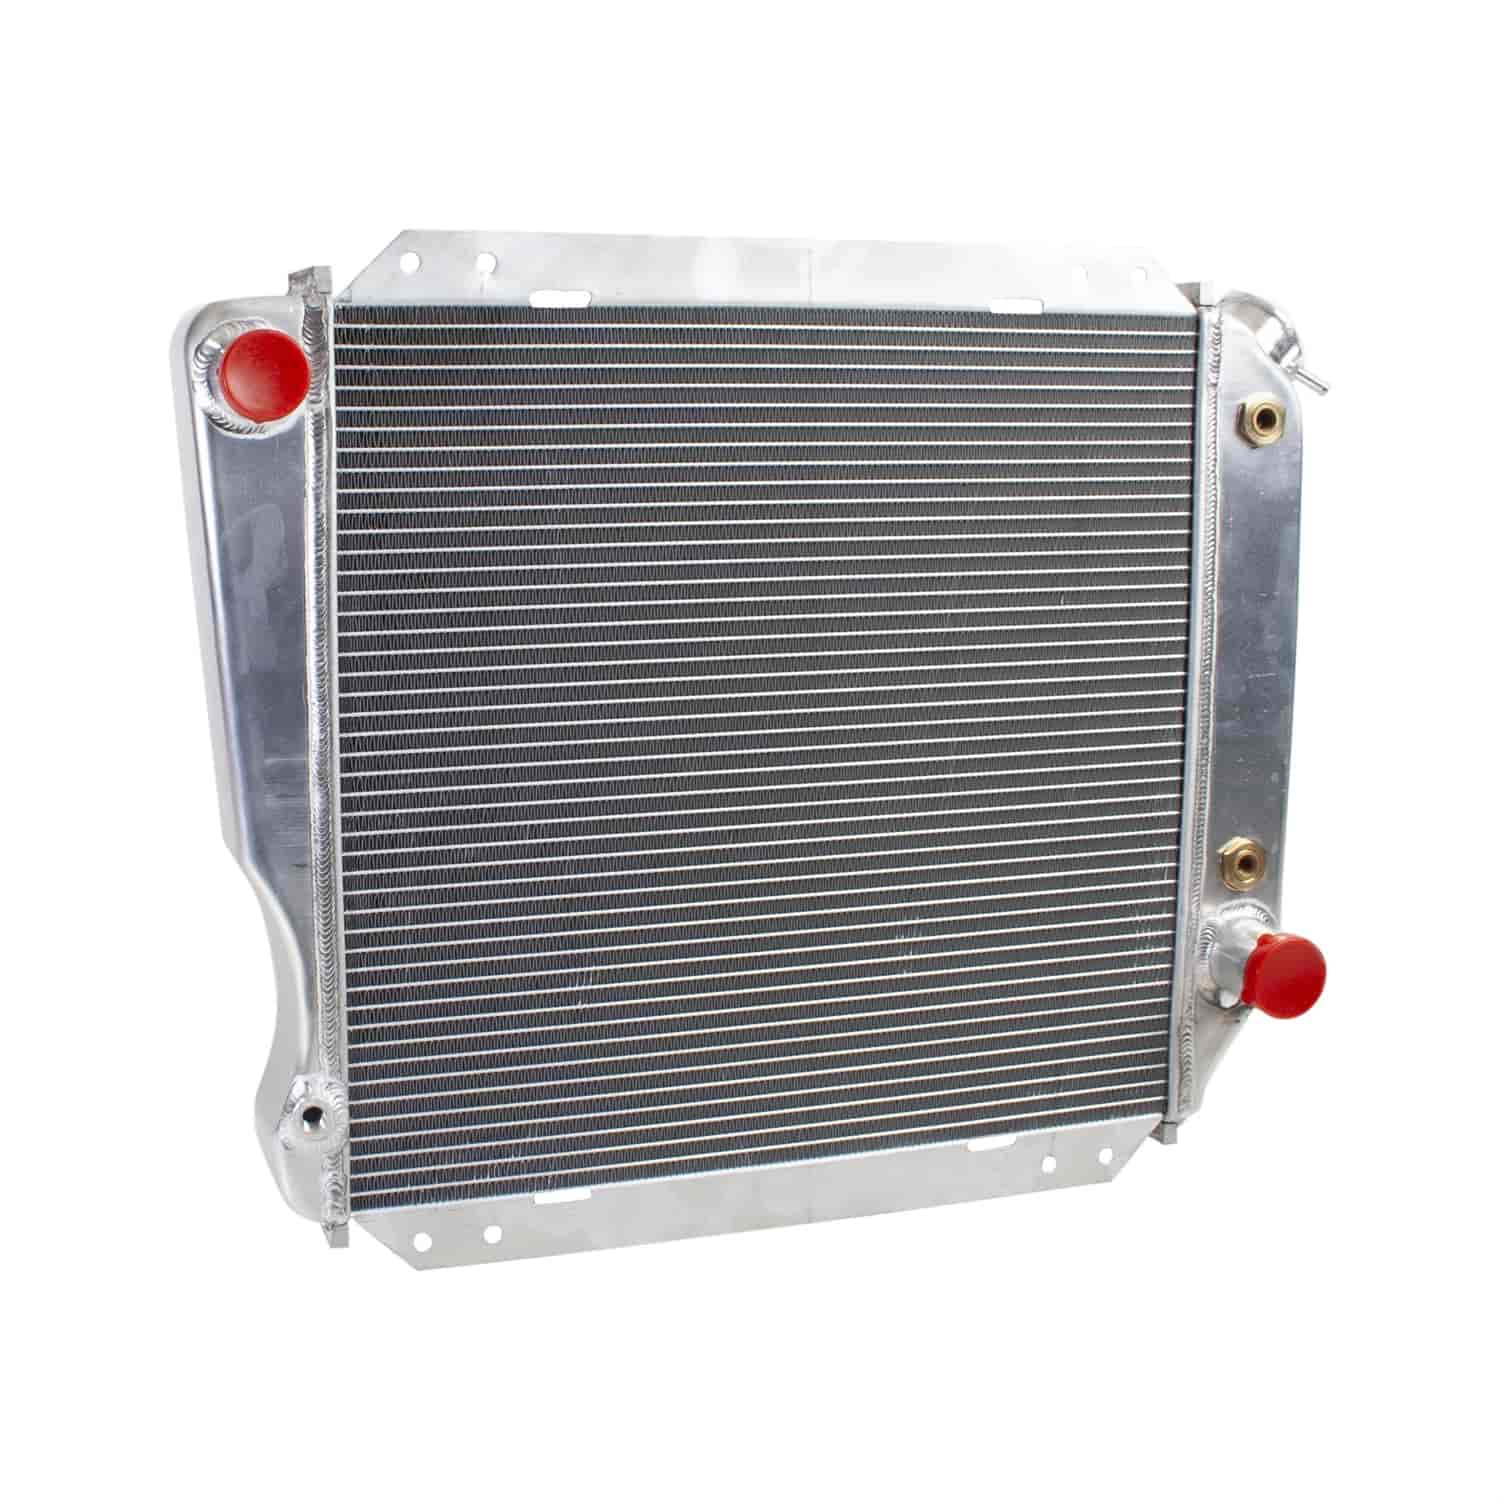 ExactFit Radiator for 1966-1977 Ford Bronco with Early